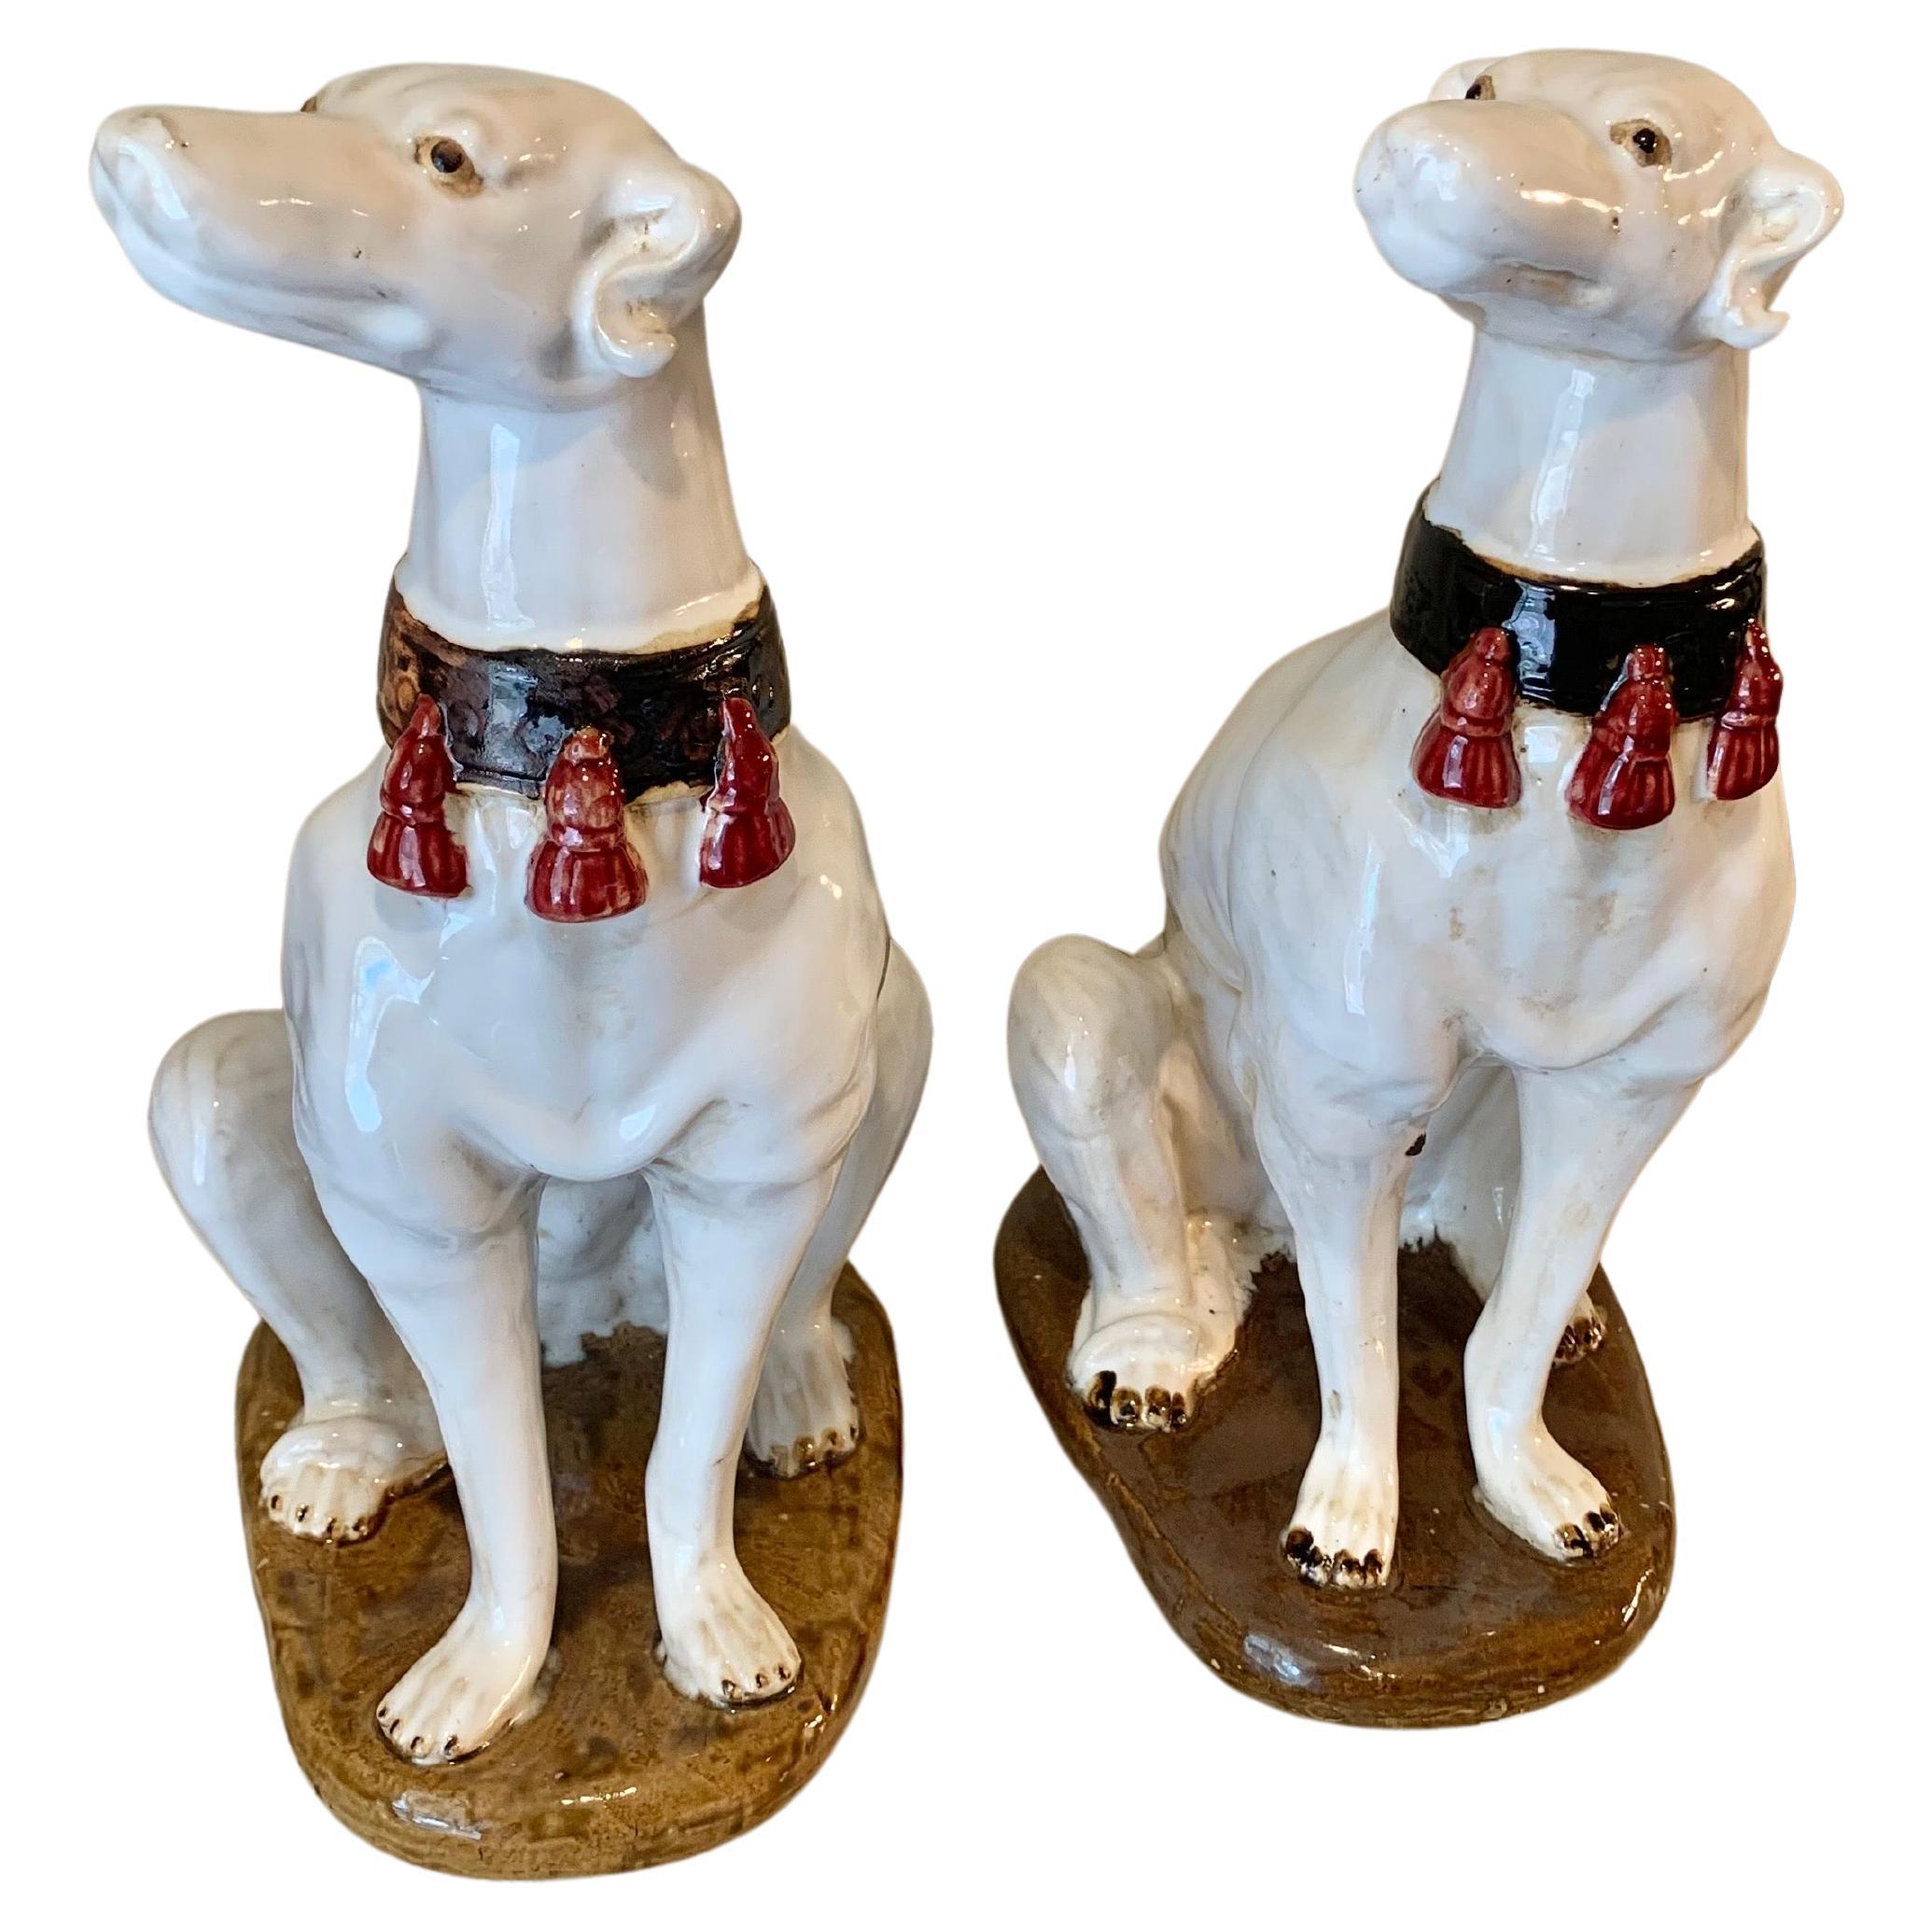 An absolutely stunning pair of Mid 20th Century Italian Ceramic Whippet Sculptures. These pottery whippets are presented with a thick black collar and red tassels against a white glazed body. They are each sitting upright on a brown base. These